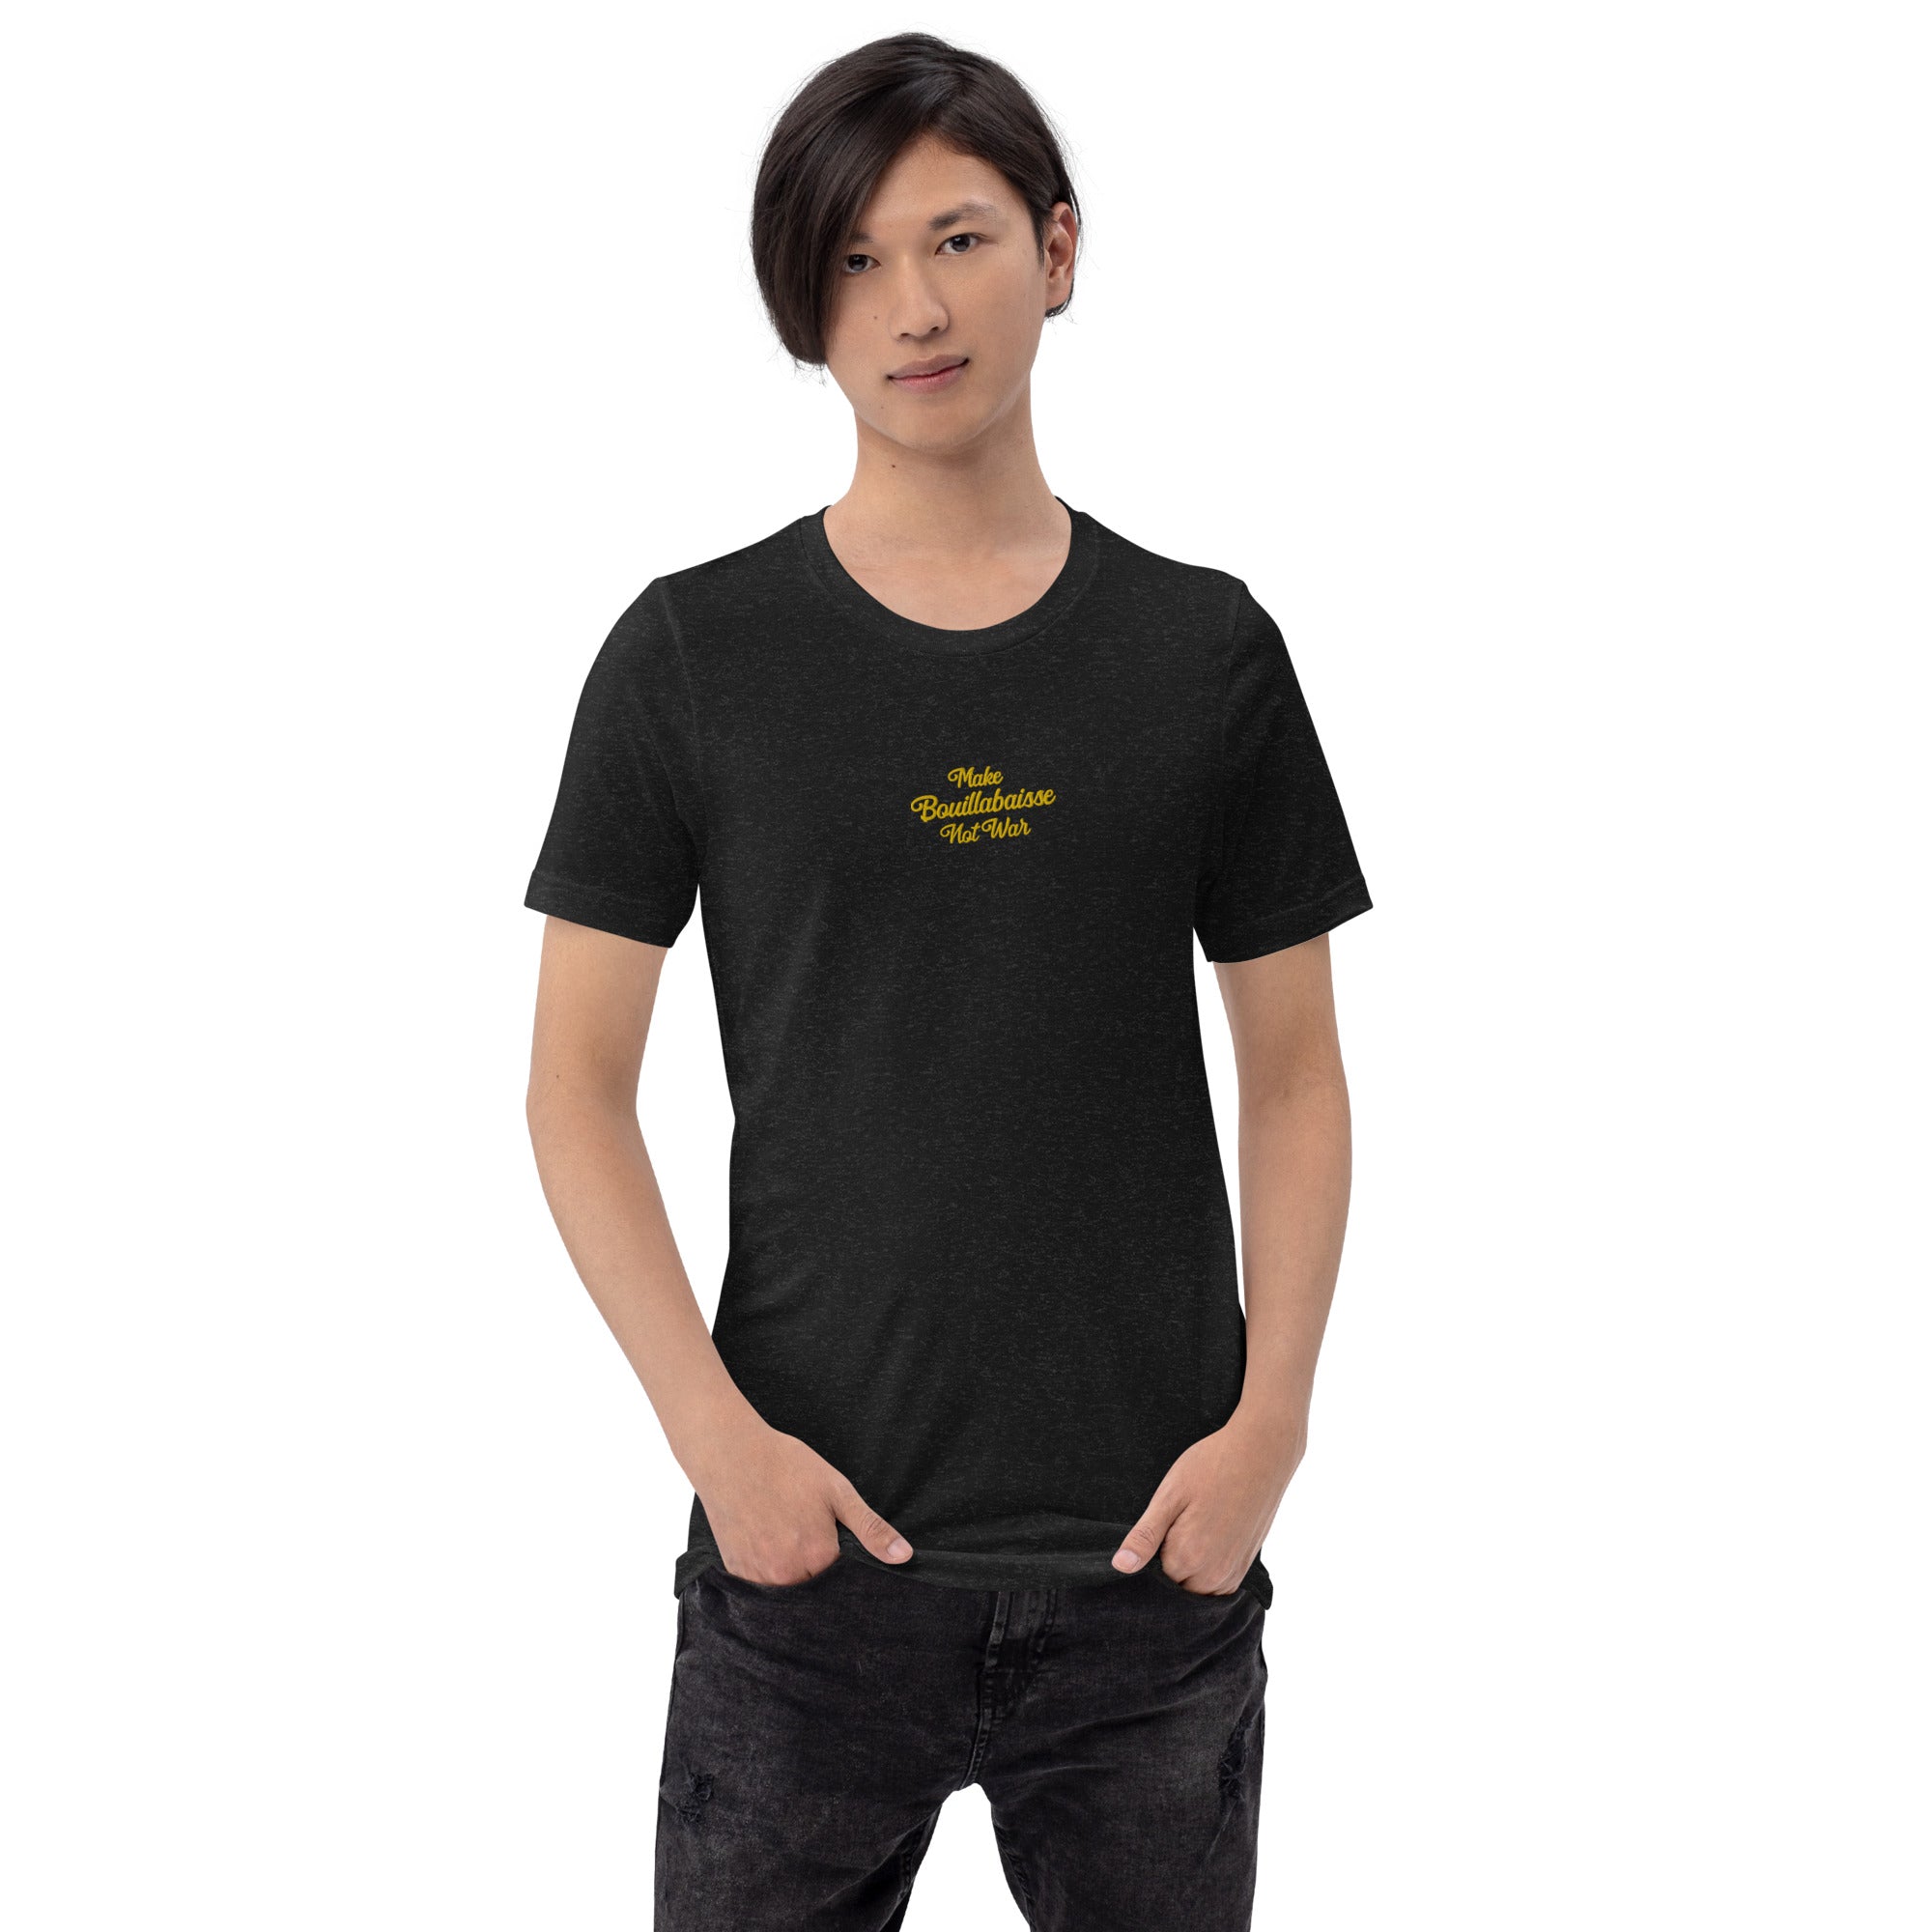 Unisex t-shirt Make Bouillabaisse Not War Text Only gold embroidered pattern on dark heather colors